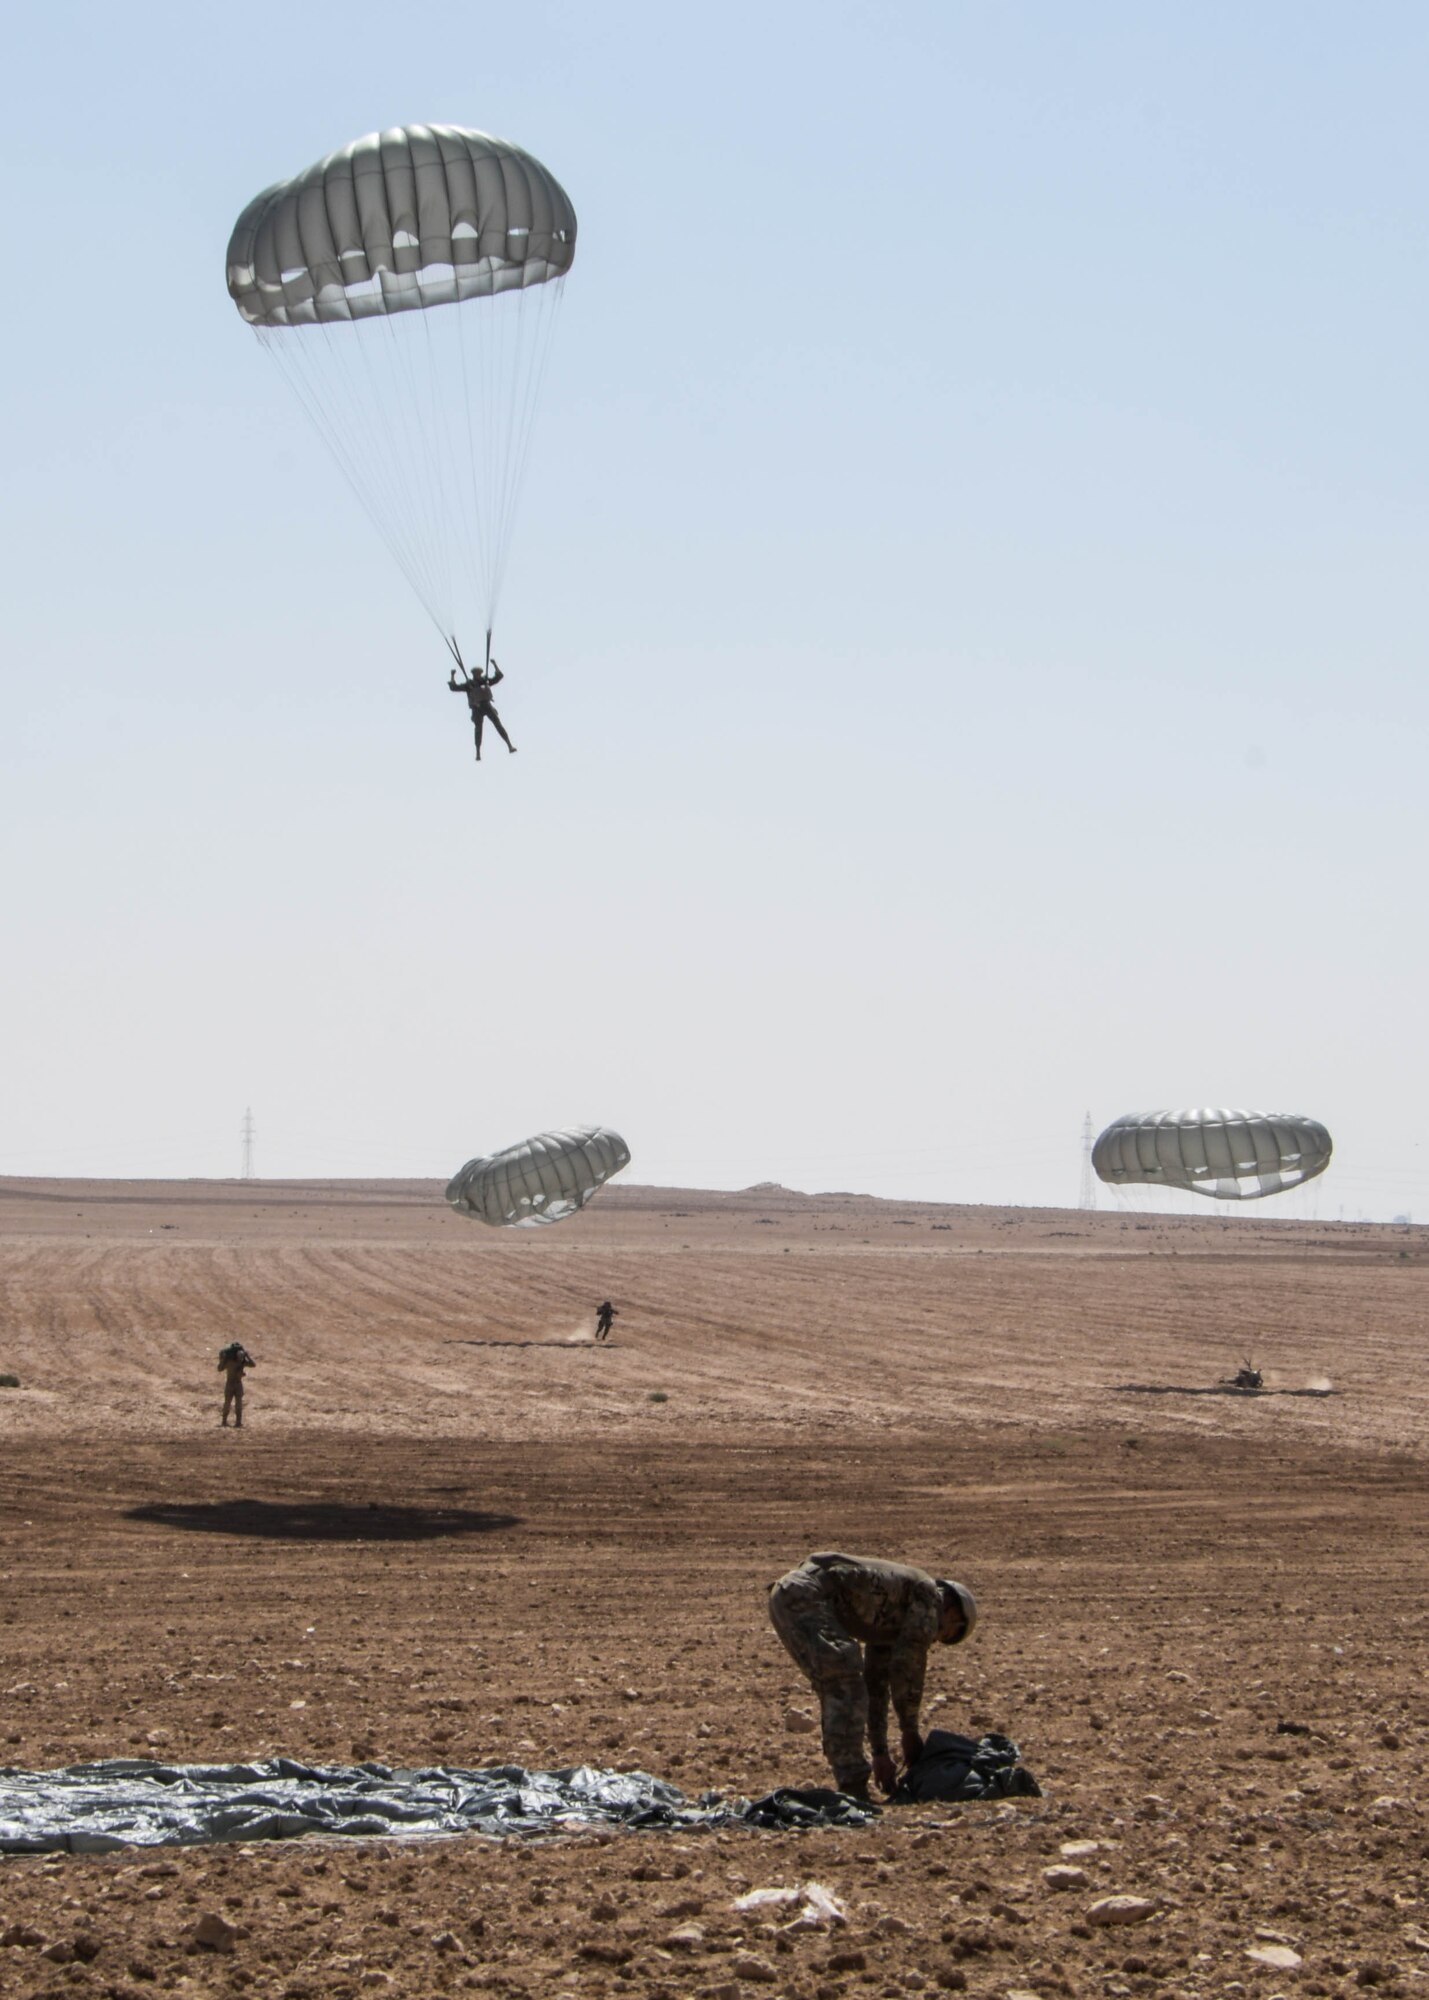 Participants in the Friendship Jump during Exercise Eager Lion parachute to the ground in Jordan on Sept. 5, 2019.